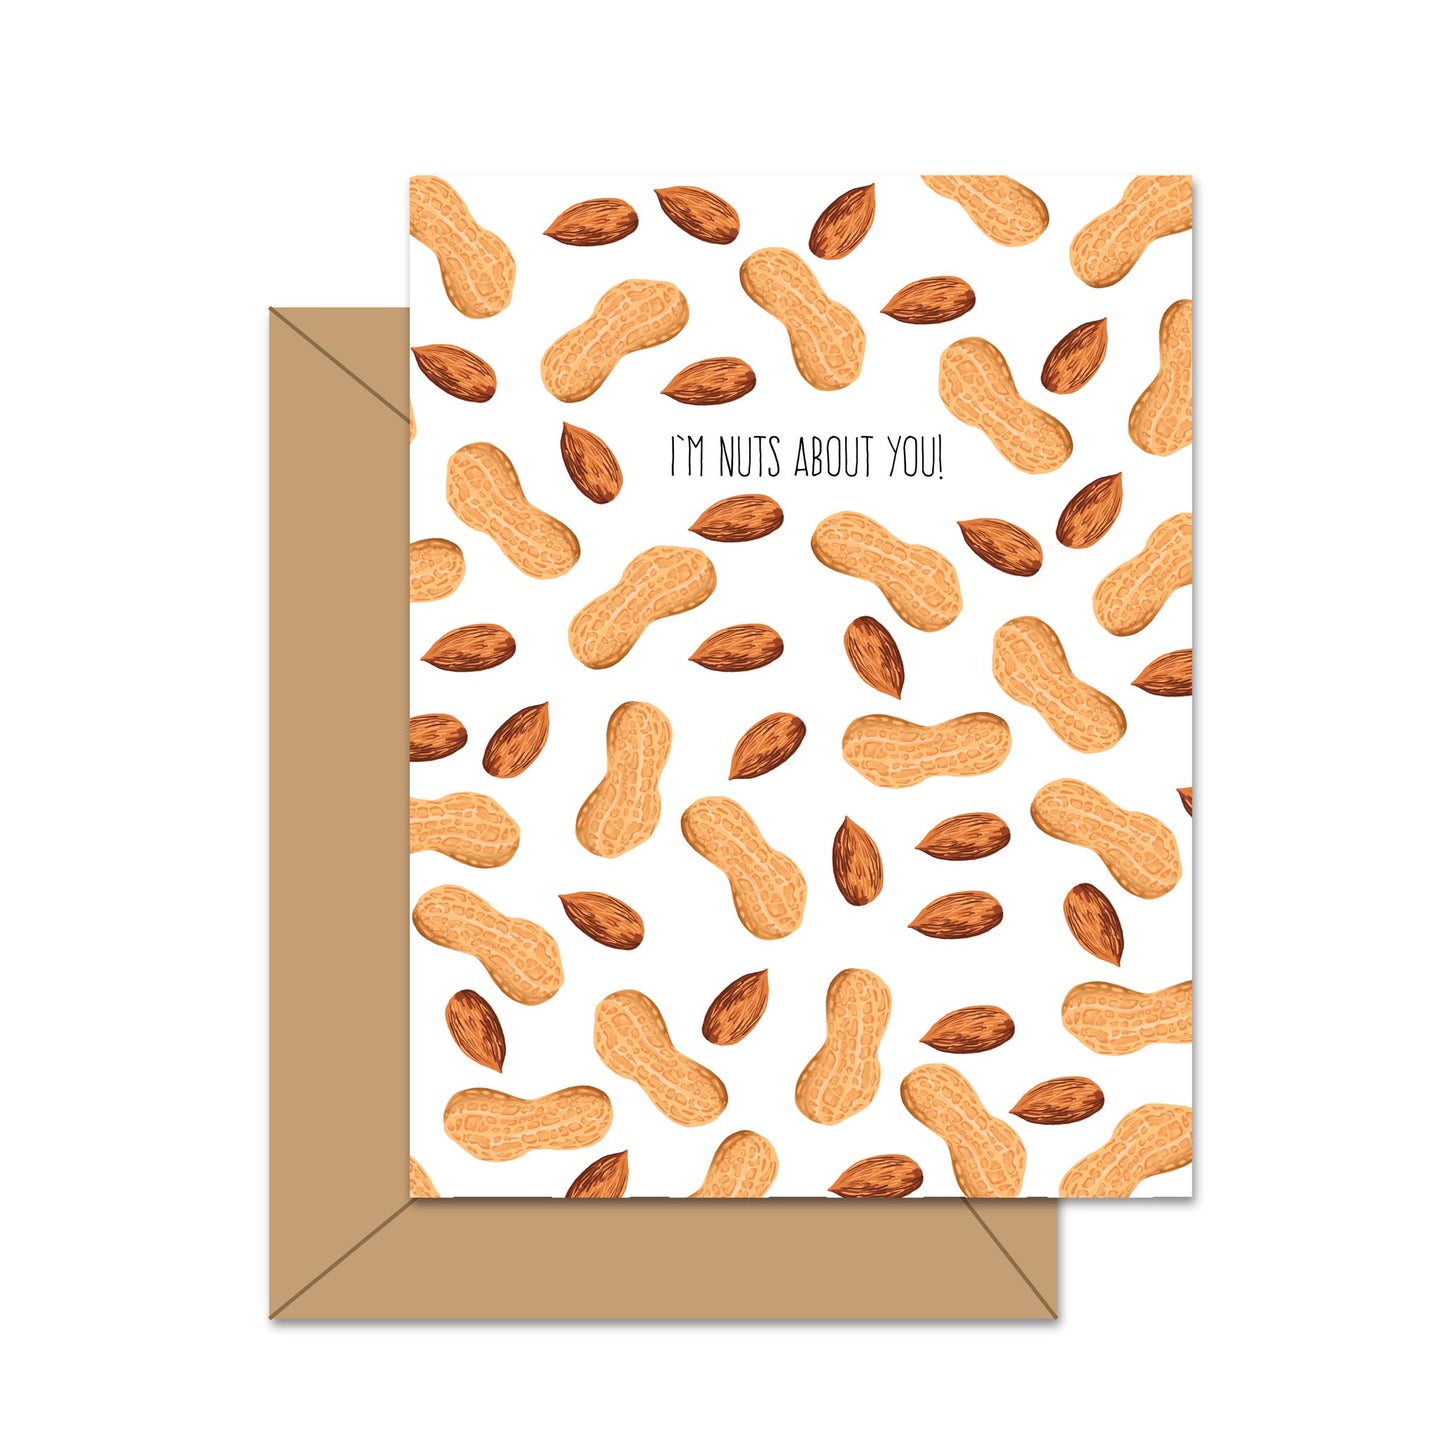 I'm Nuts About You! - Greeting Card